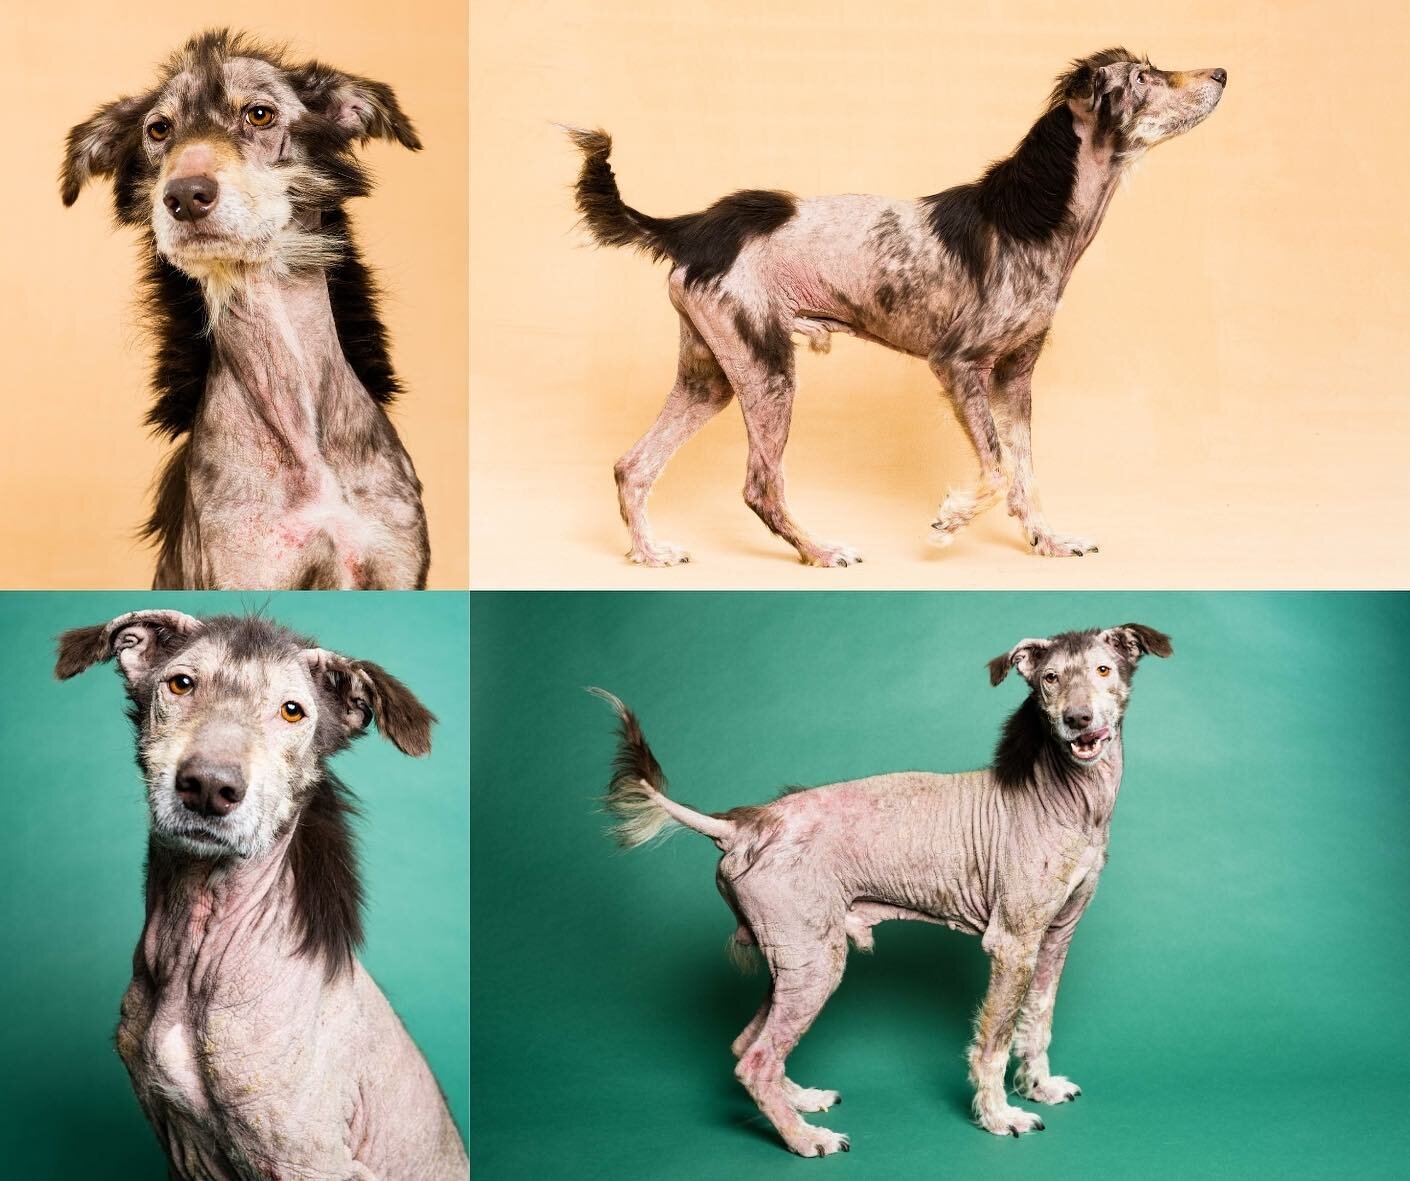 Some of you will remember Odie, an Australian Shepherd fostered by @dogworks_ohio who has some major allergy issues. Odie&rsquo;s rehab has not been simple or straightforward. However, we can see progress.

Top photos before: 1/25.
Bottom photos now: